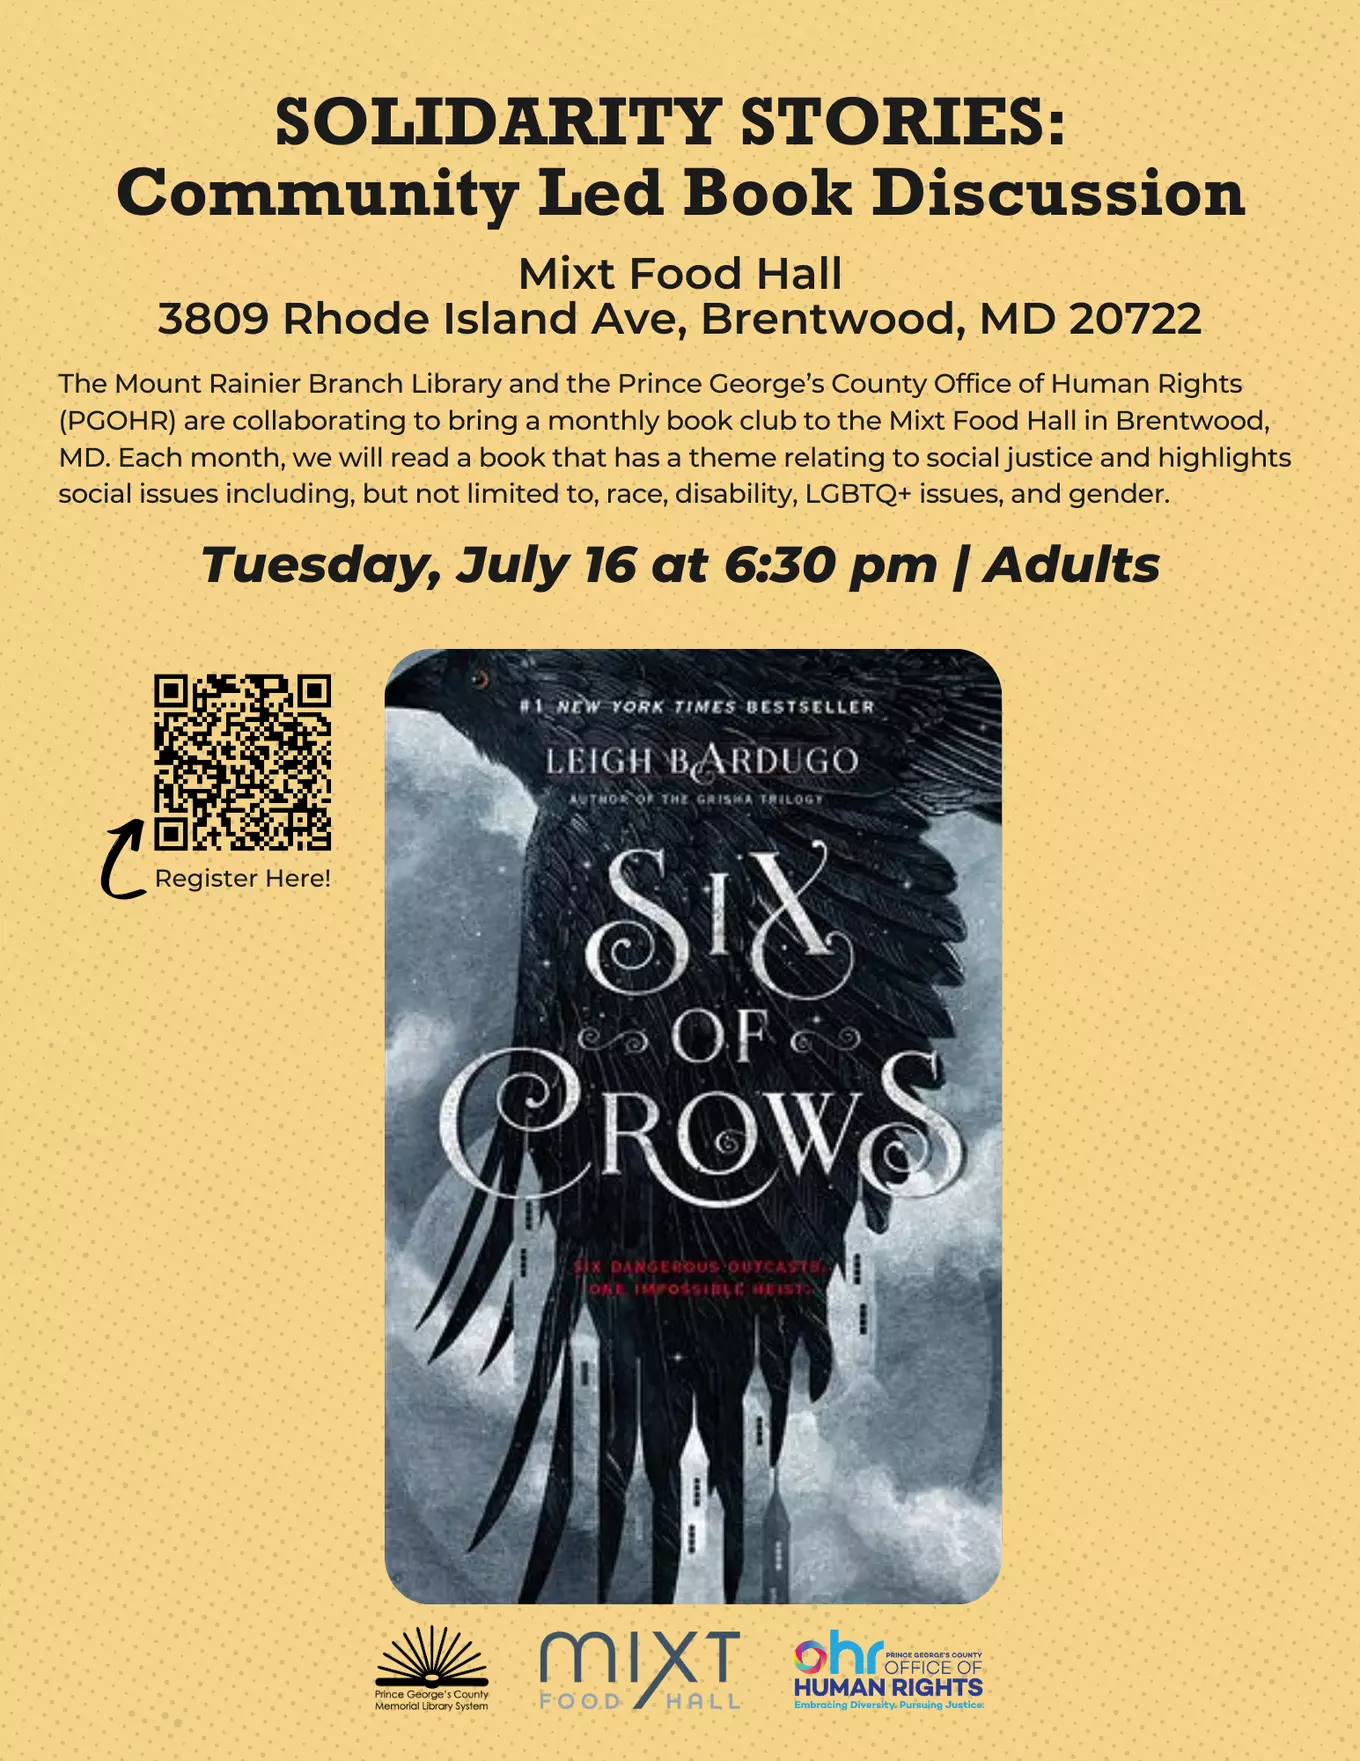 IMAGE: Flyer for Solidarity Stories featuring the book cover for "Book of Crows"